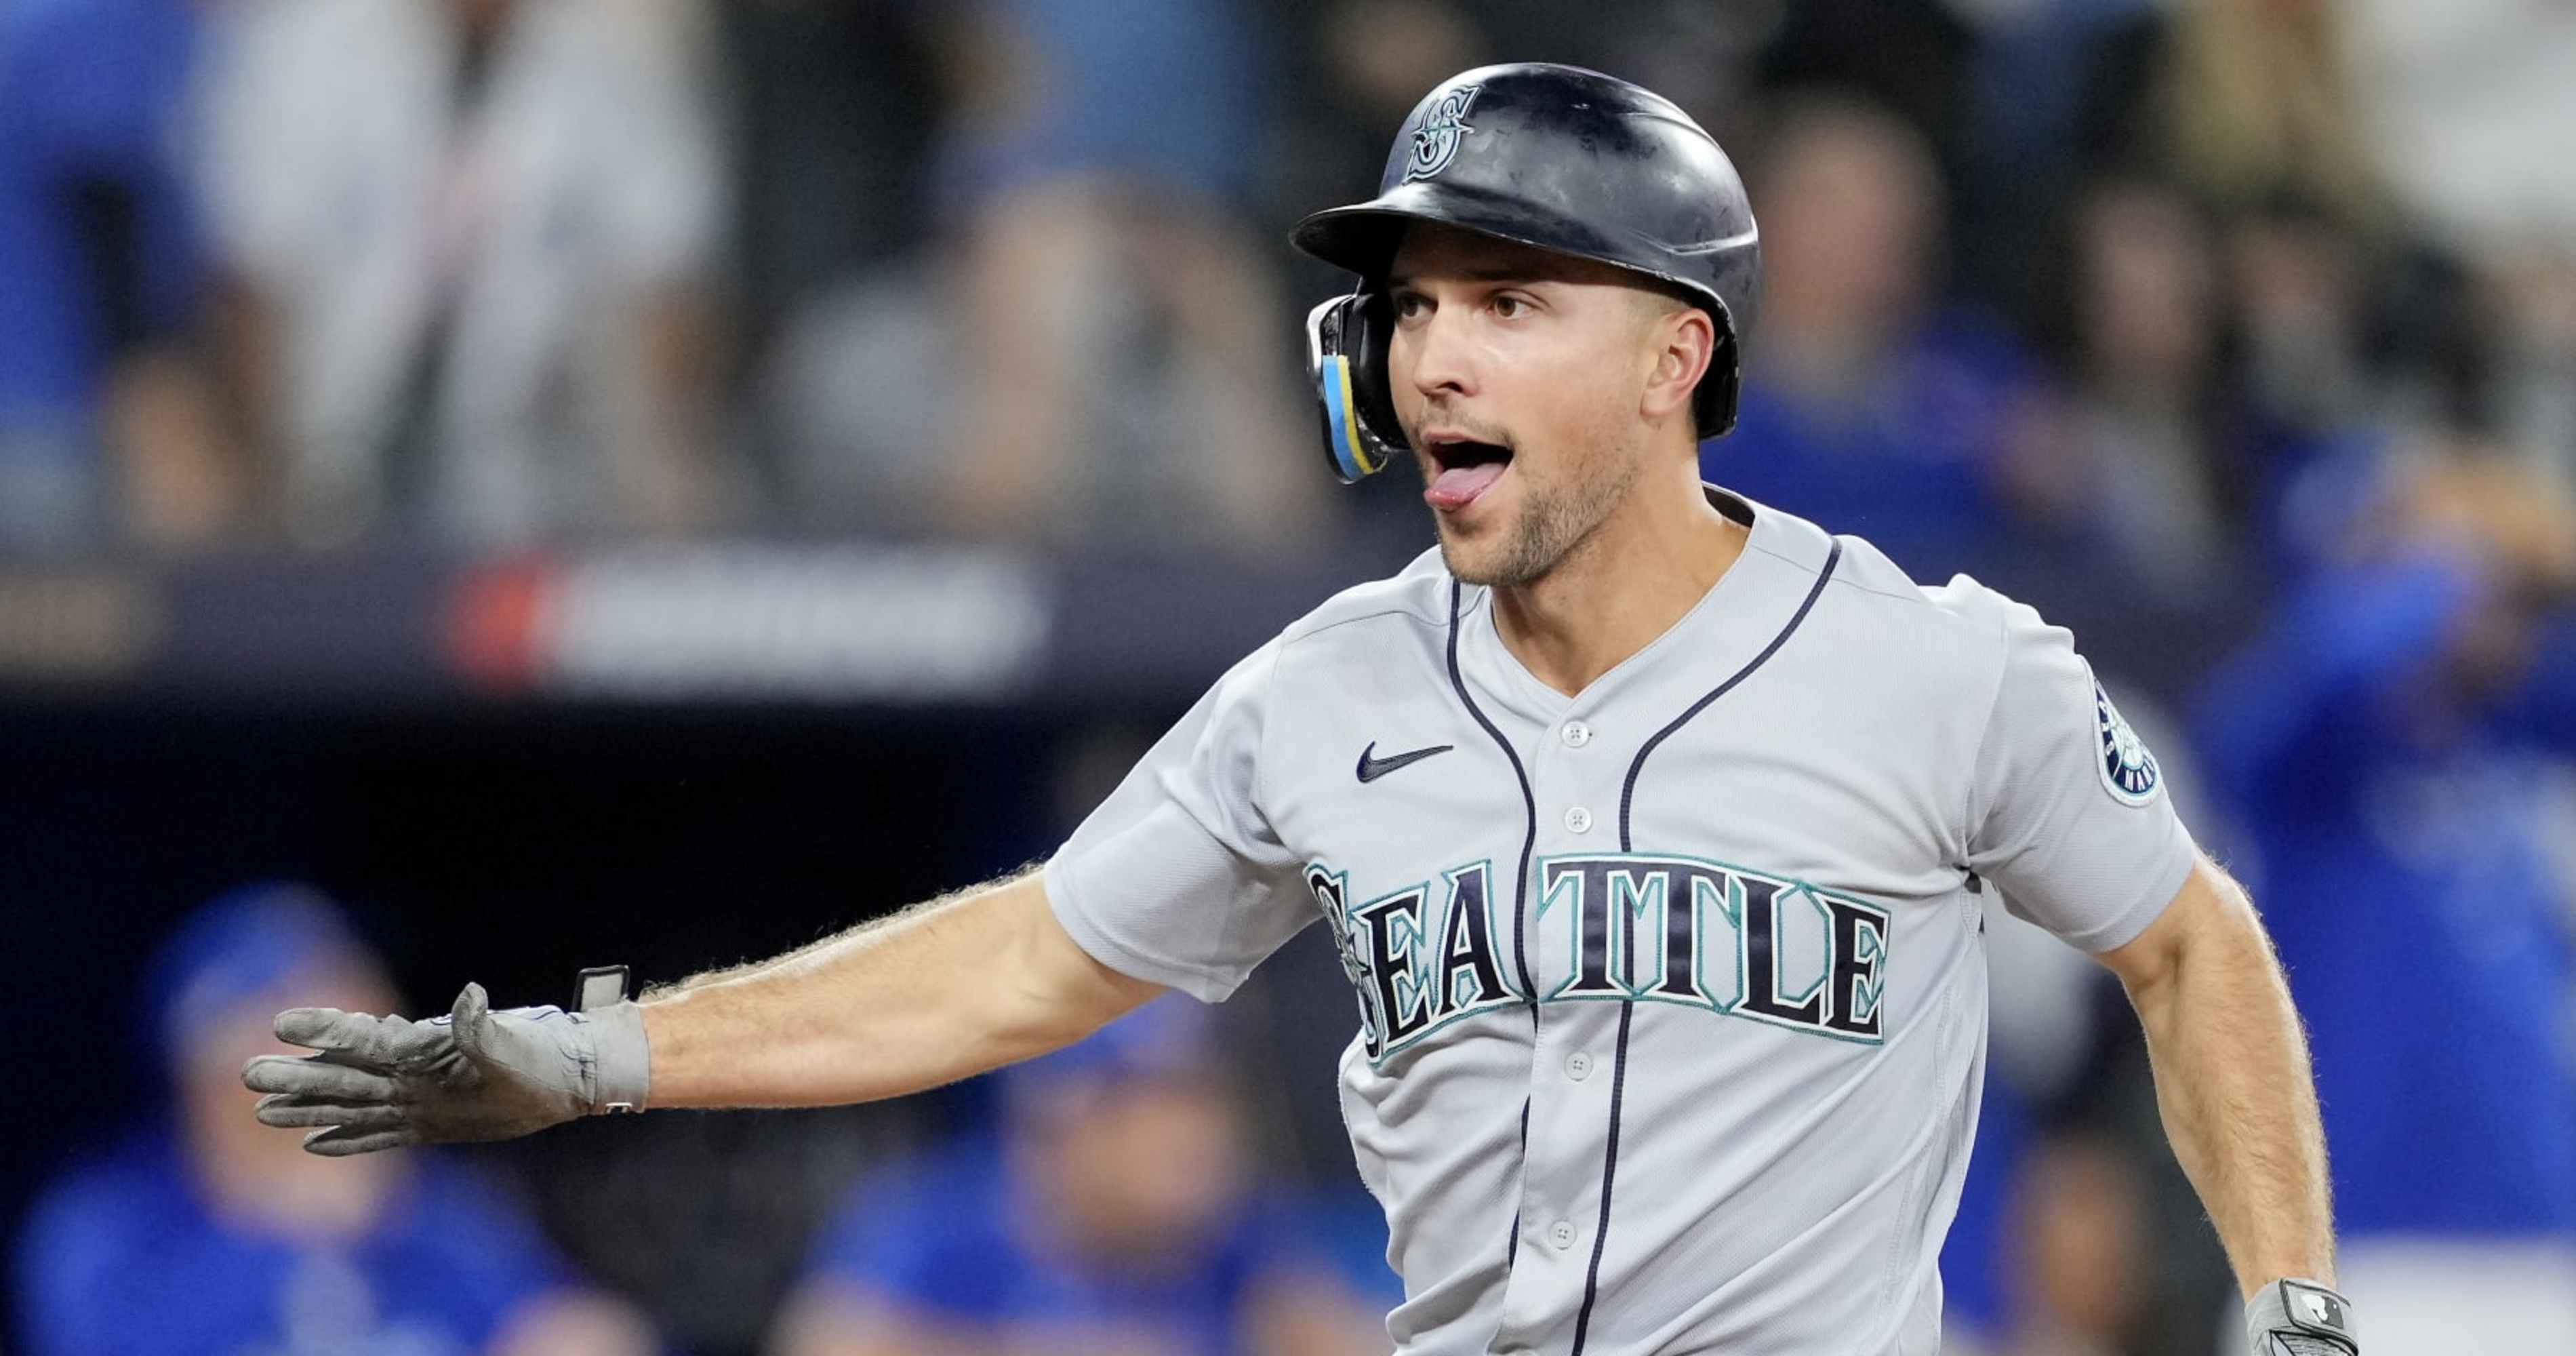 2021 Series Preview: Seattle Mariners @ Houston Astros - The